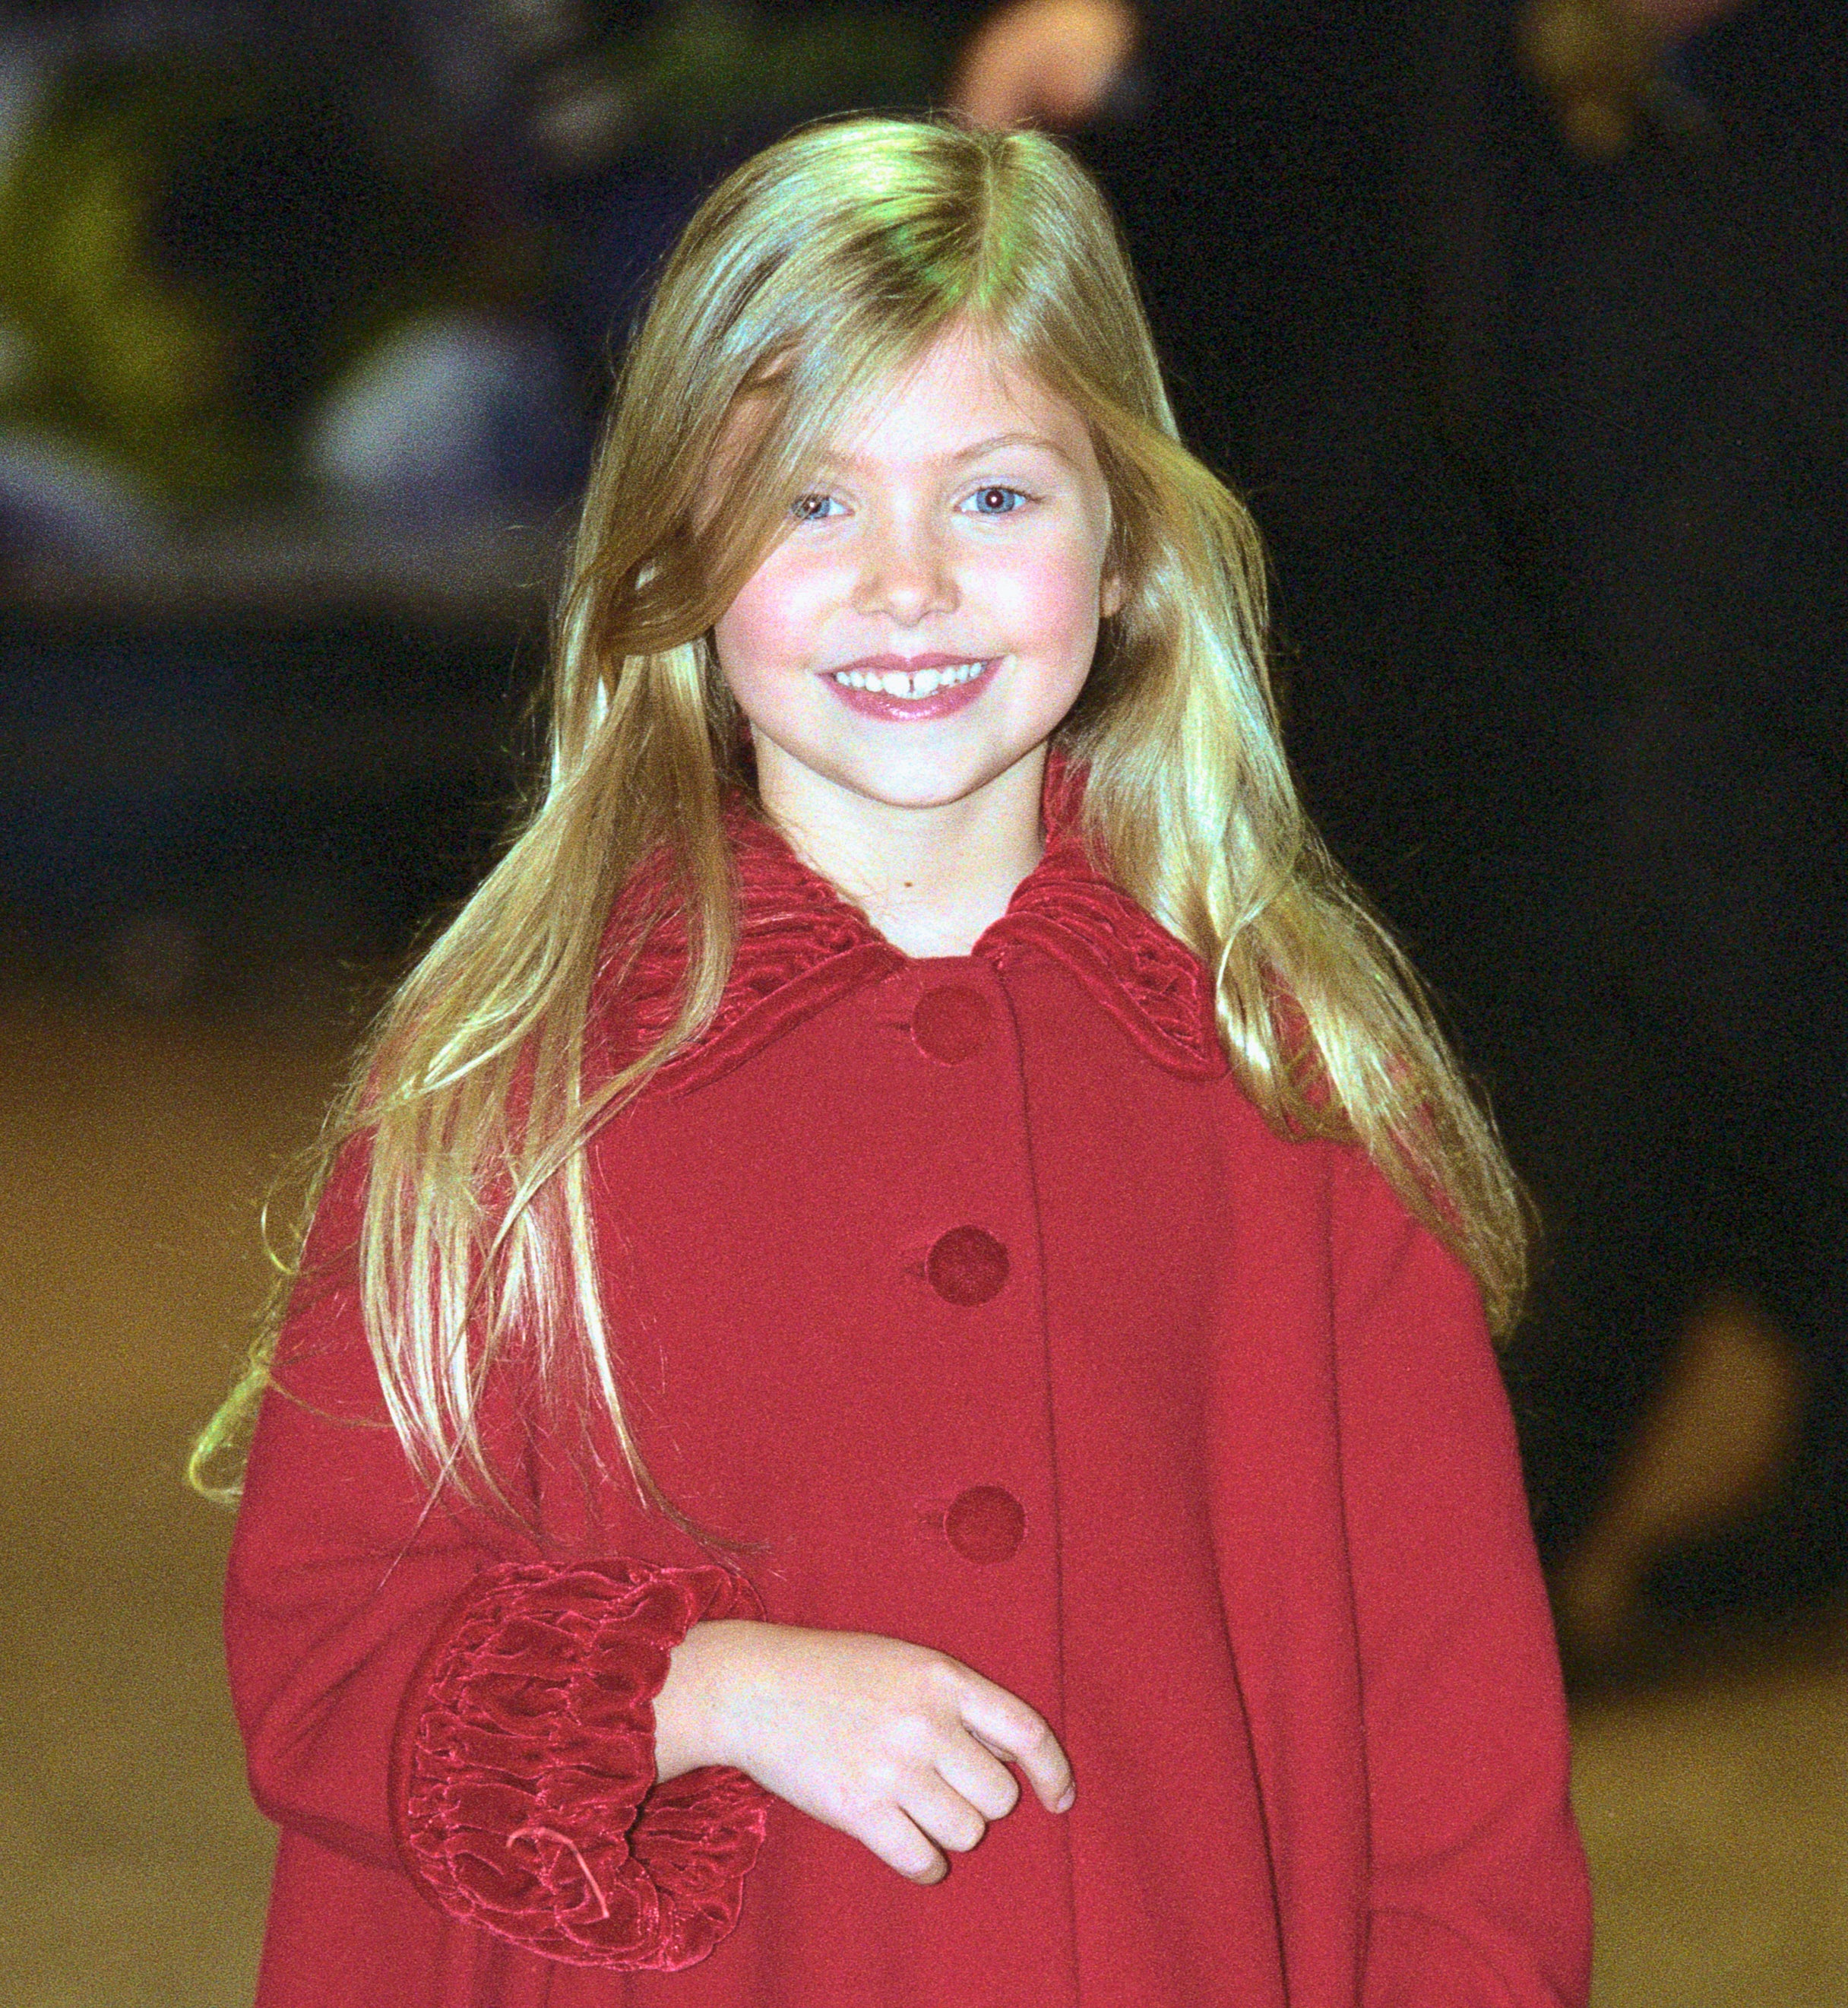 Close-up of Taylor as a child smiling at an event